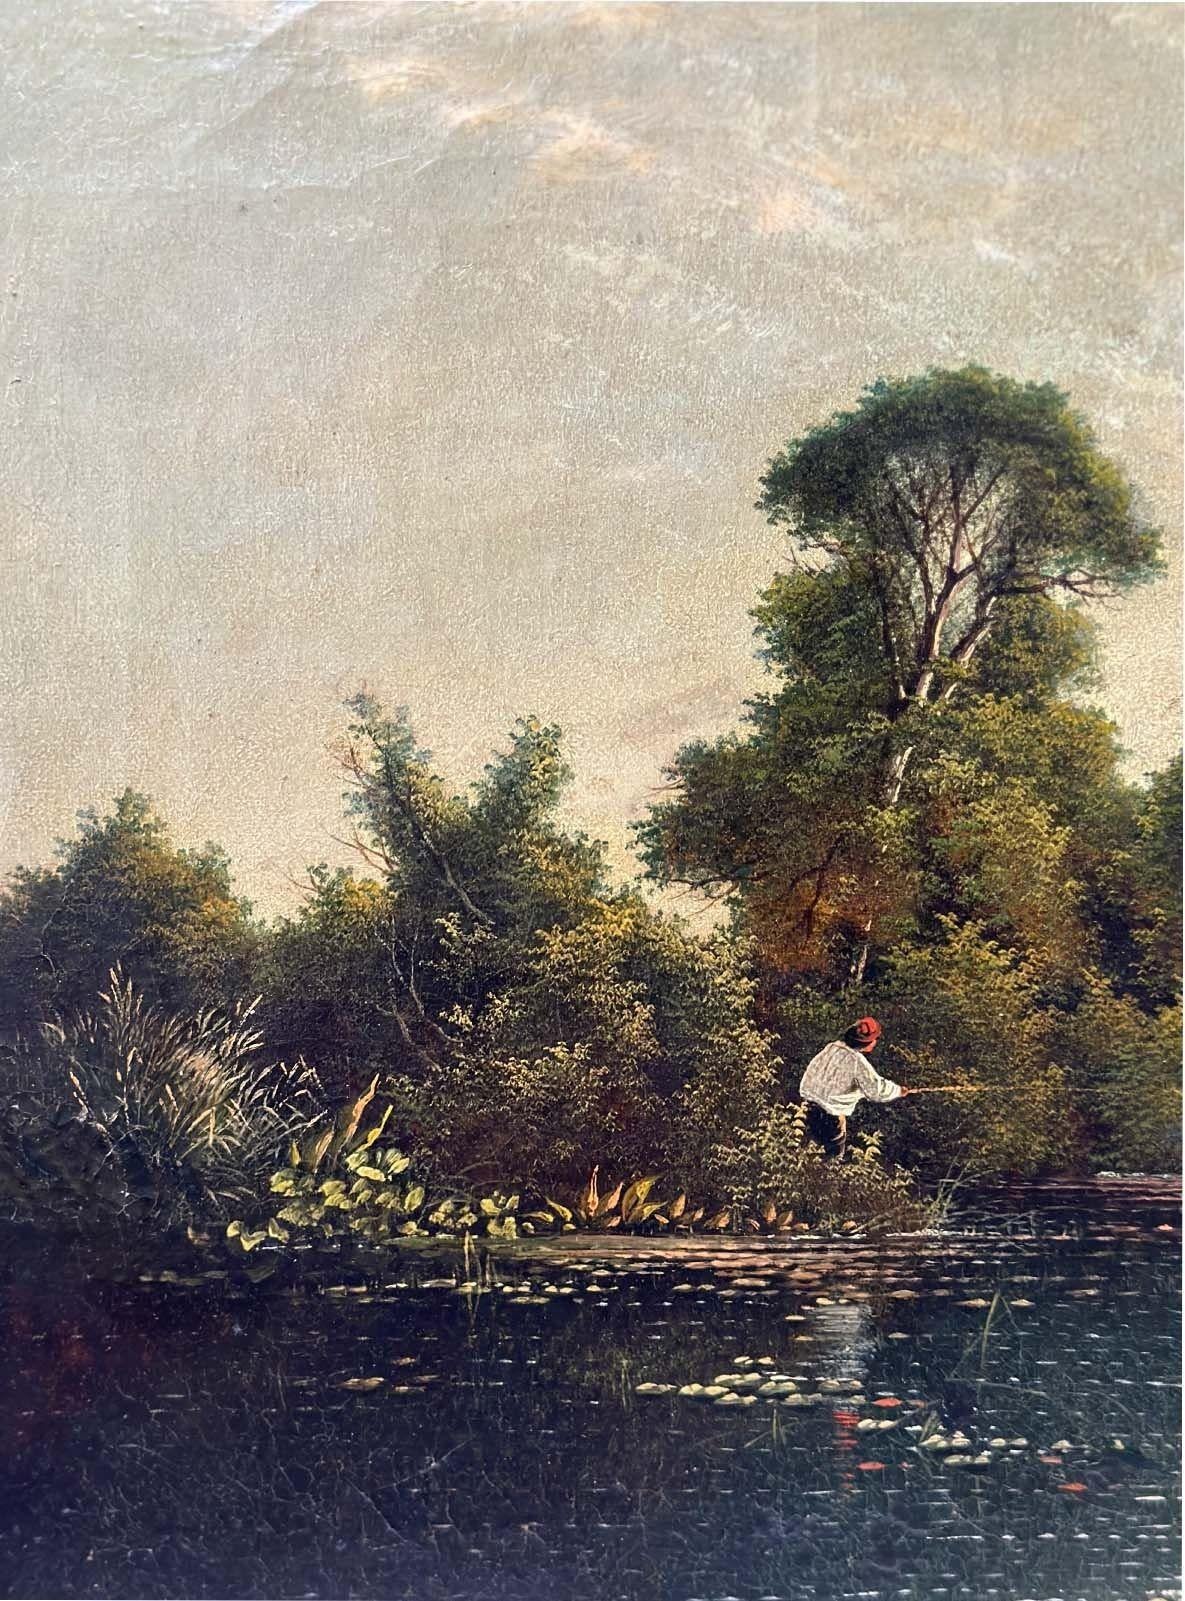 A traditional oil on canvas depicting a fisherman by a river, having beautiful trees all around the scene. The setting seems to evoke a near-sunset ambiance, characterized by the warm yellow hues and subtle hints of pink that grace the sky.
The